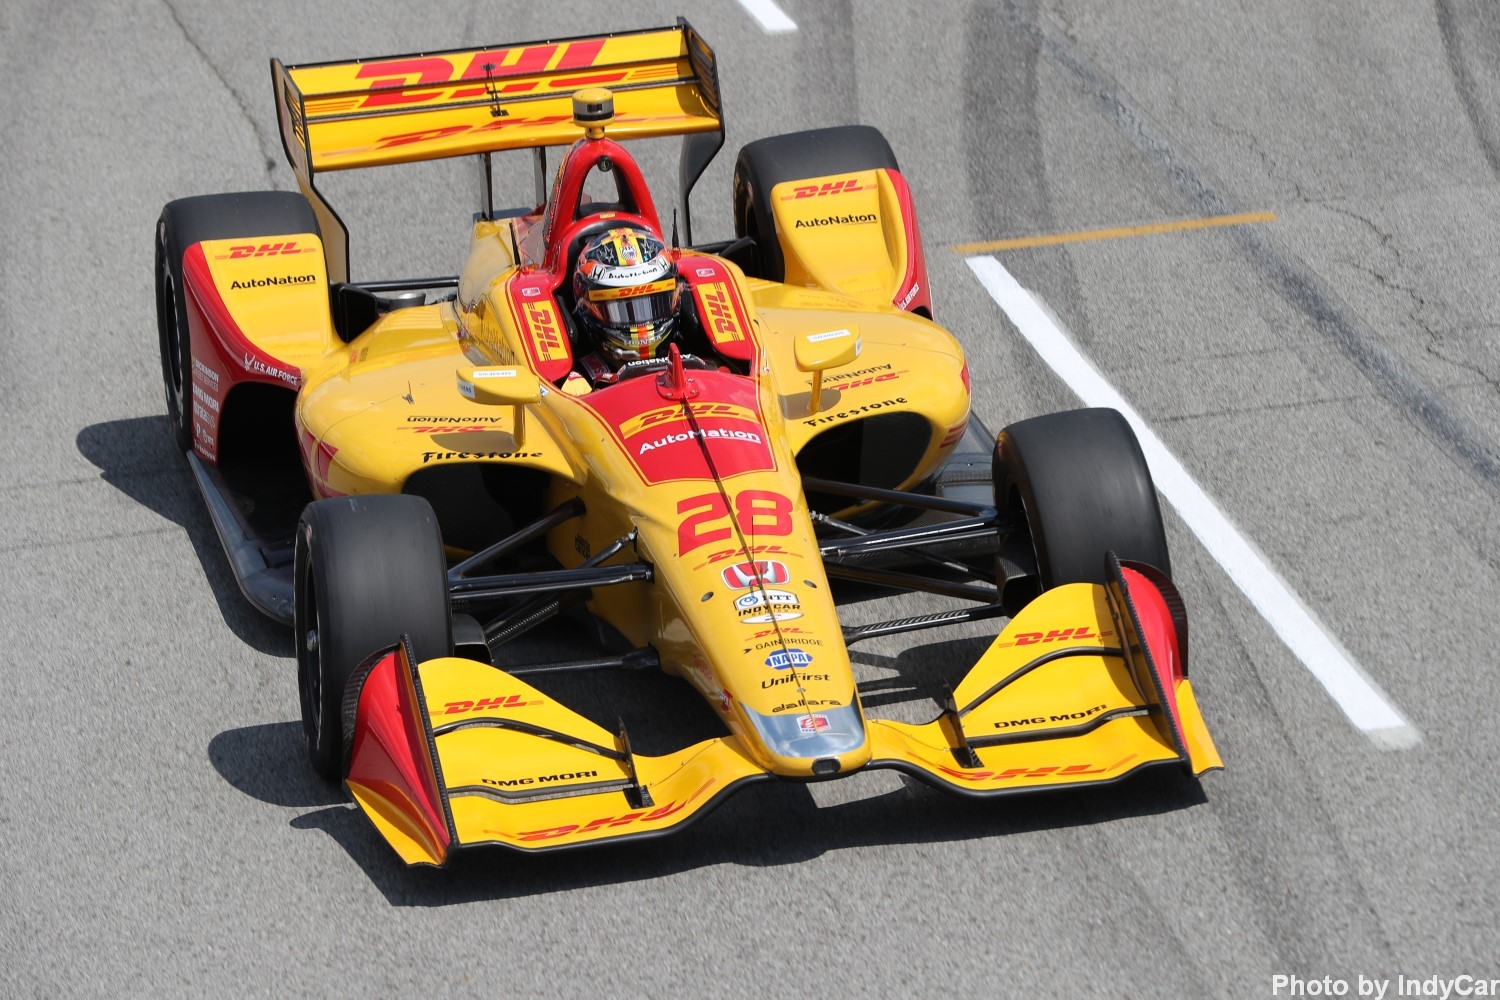 Hunter-Reay saved face for the Andretti team who were otherwise off the pace